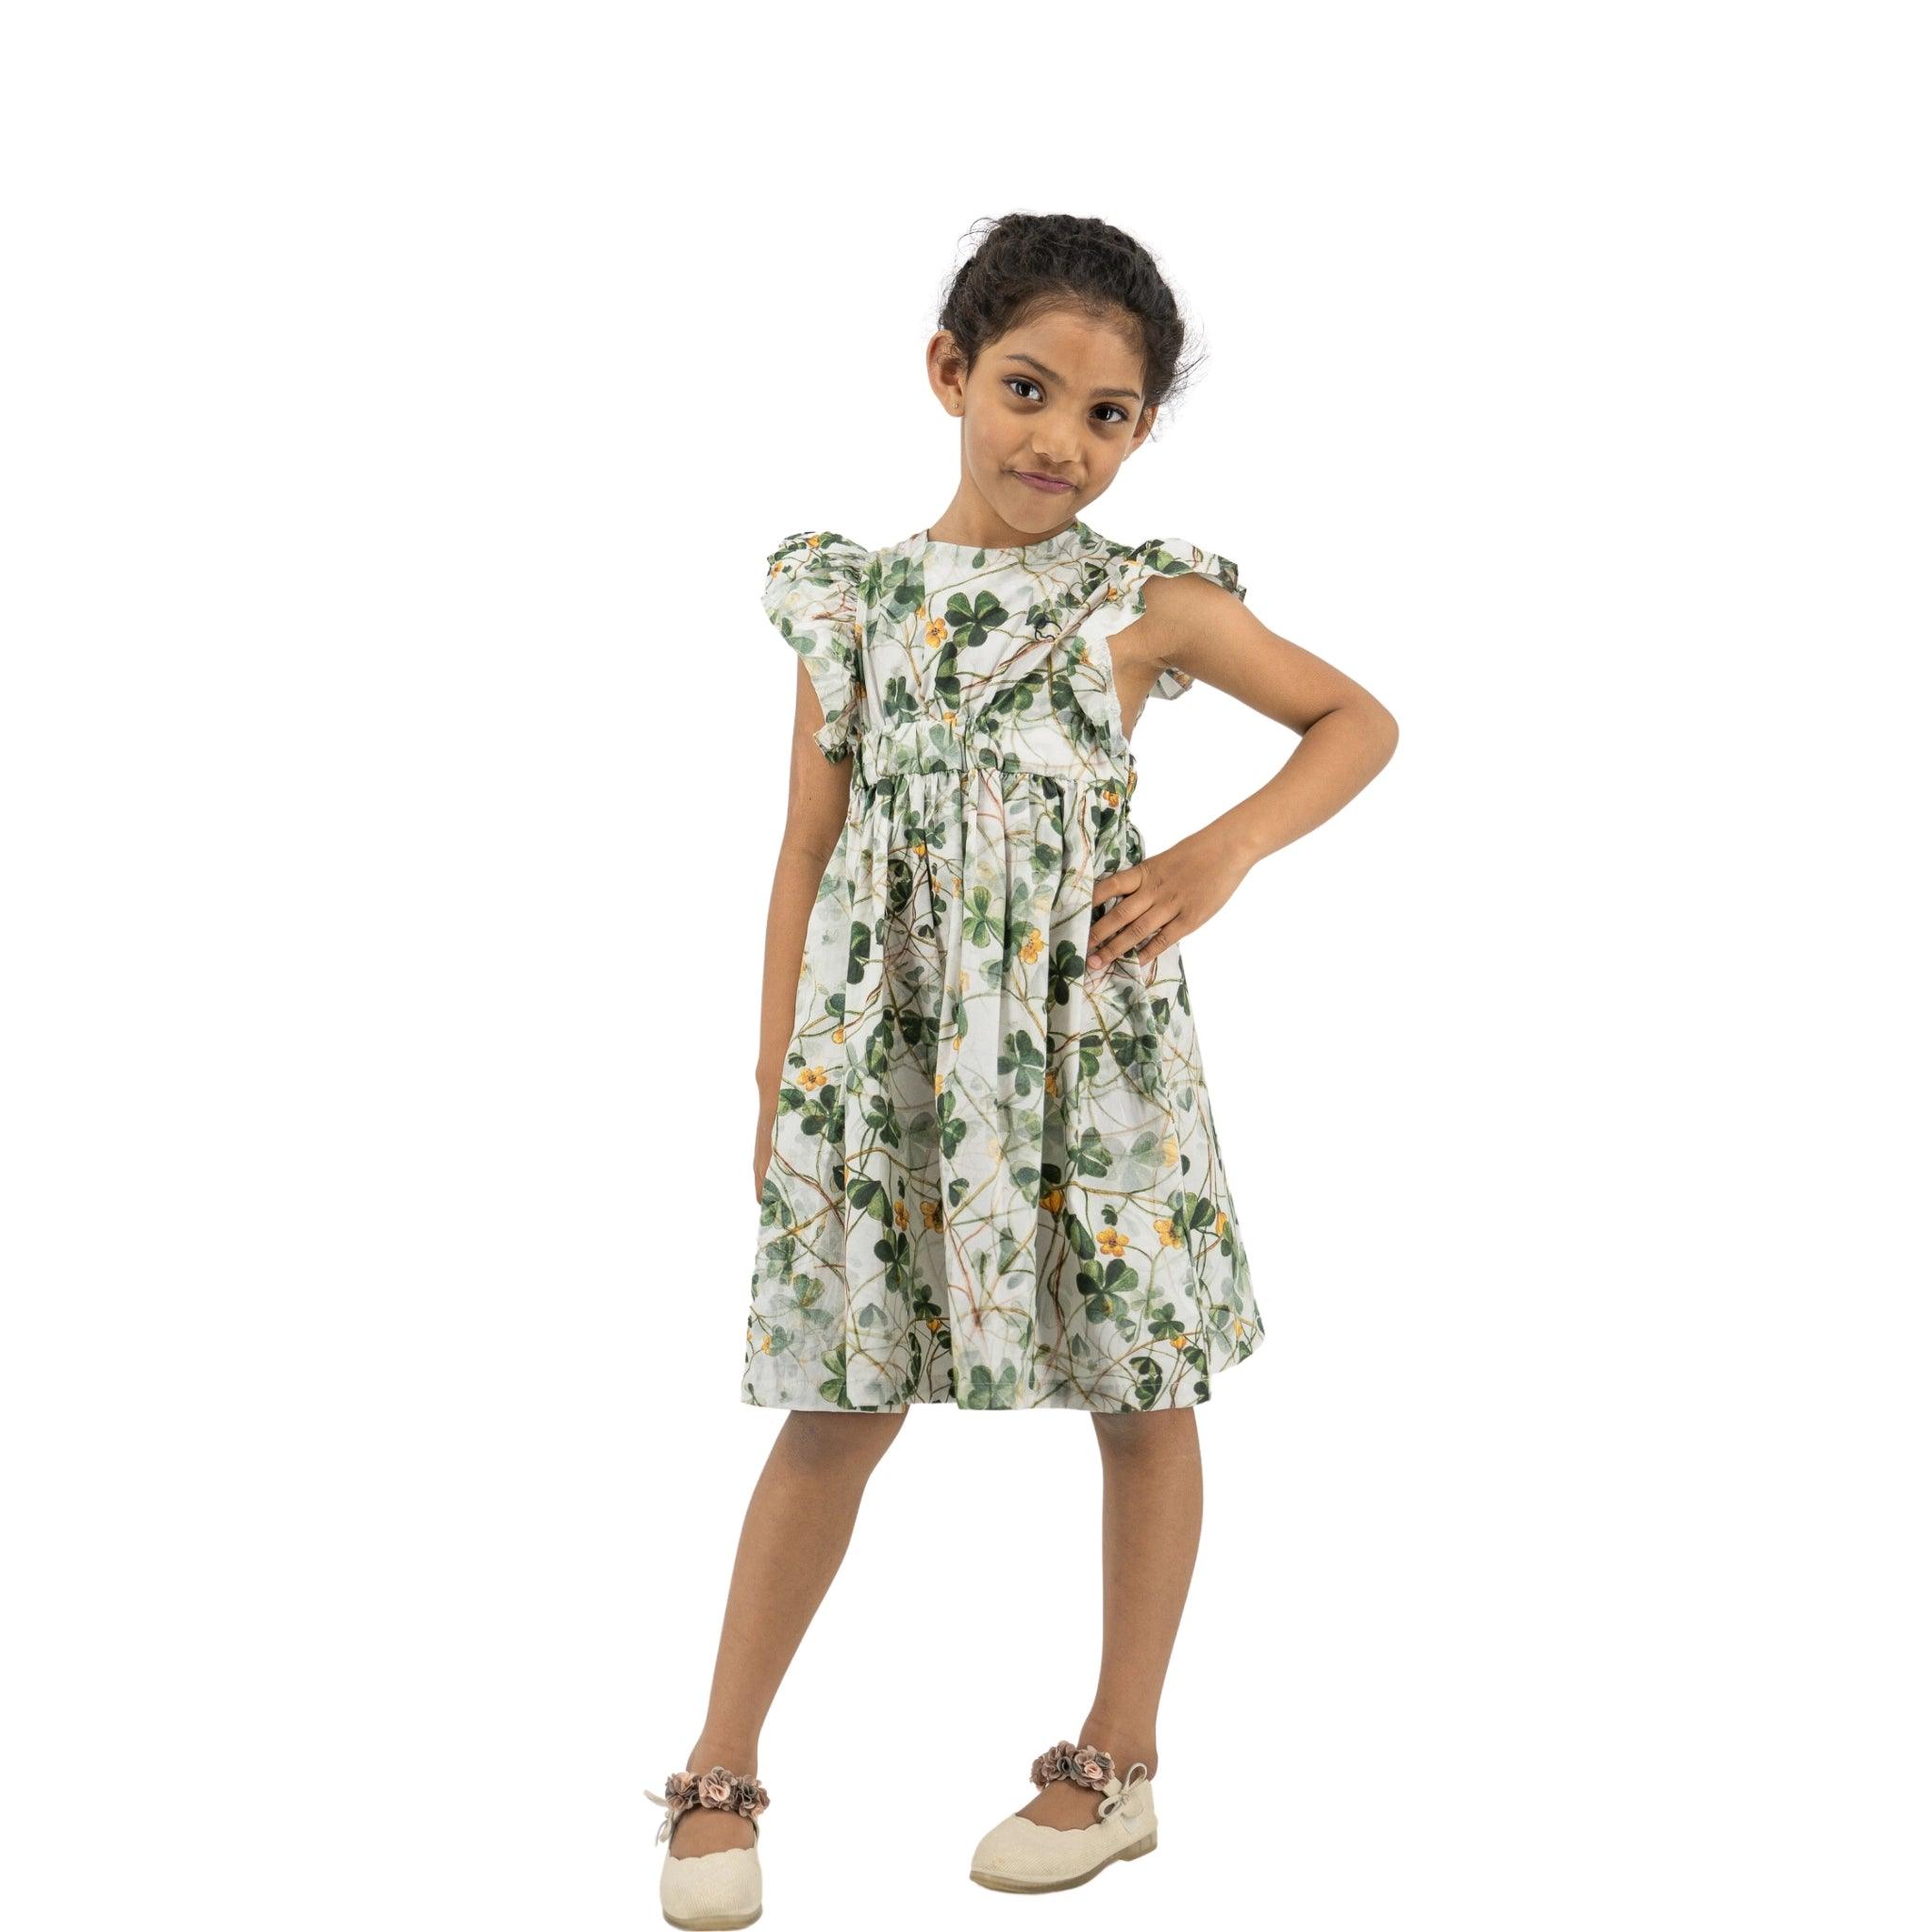 Young girl posing confidently, wearing a Karee green floral cotton dress and light brown shoes, standing against a white background.